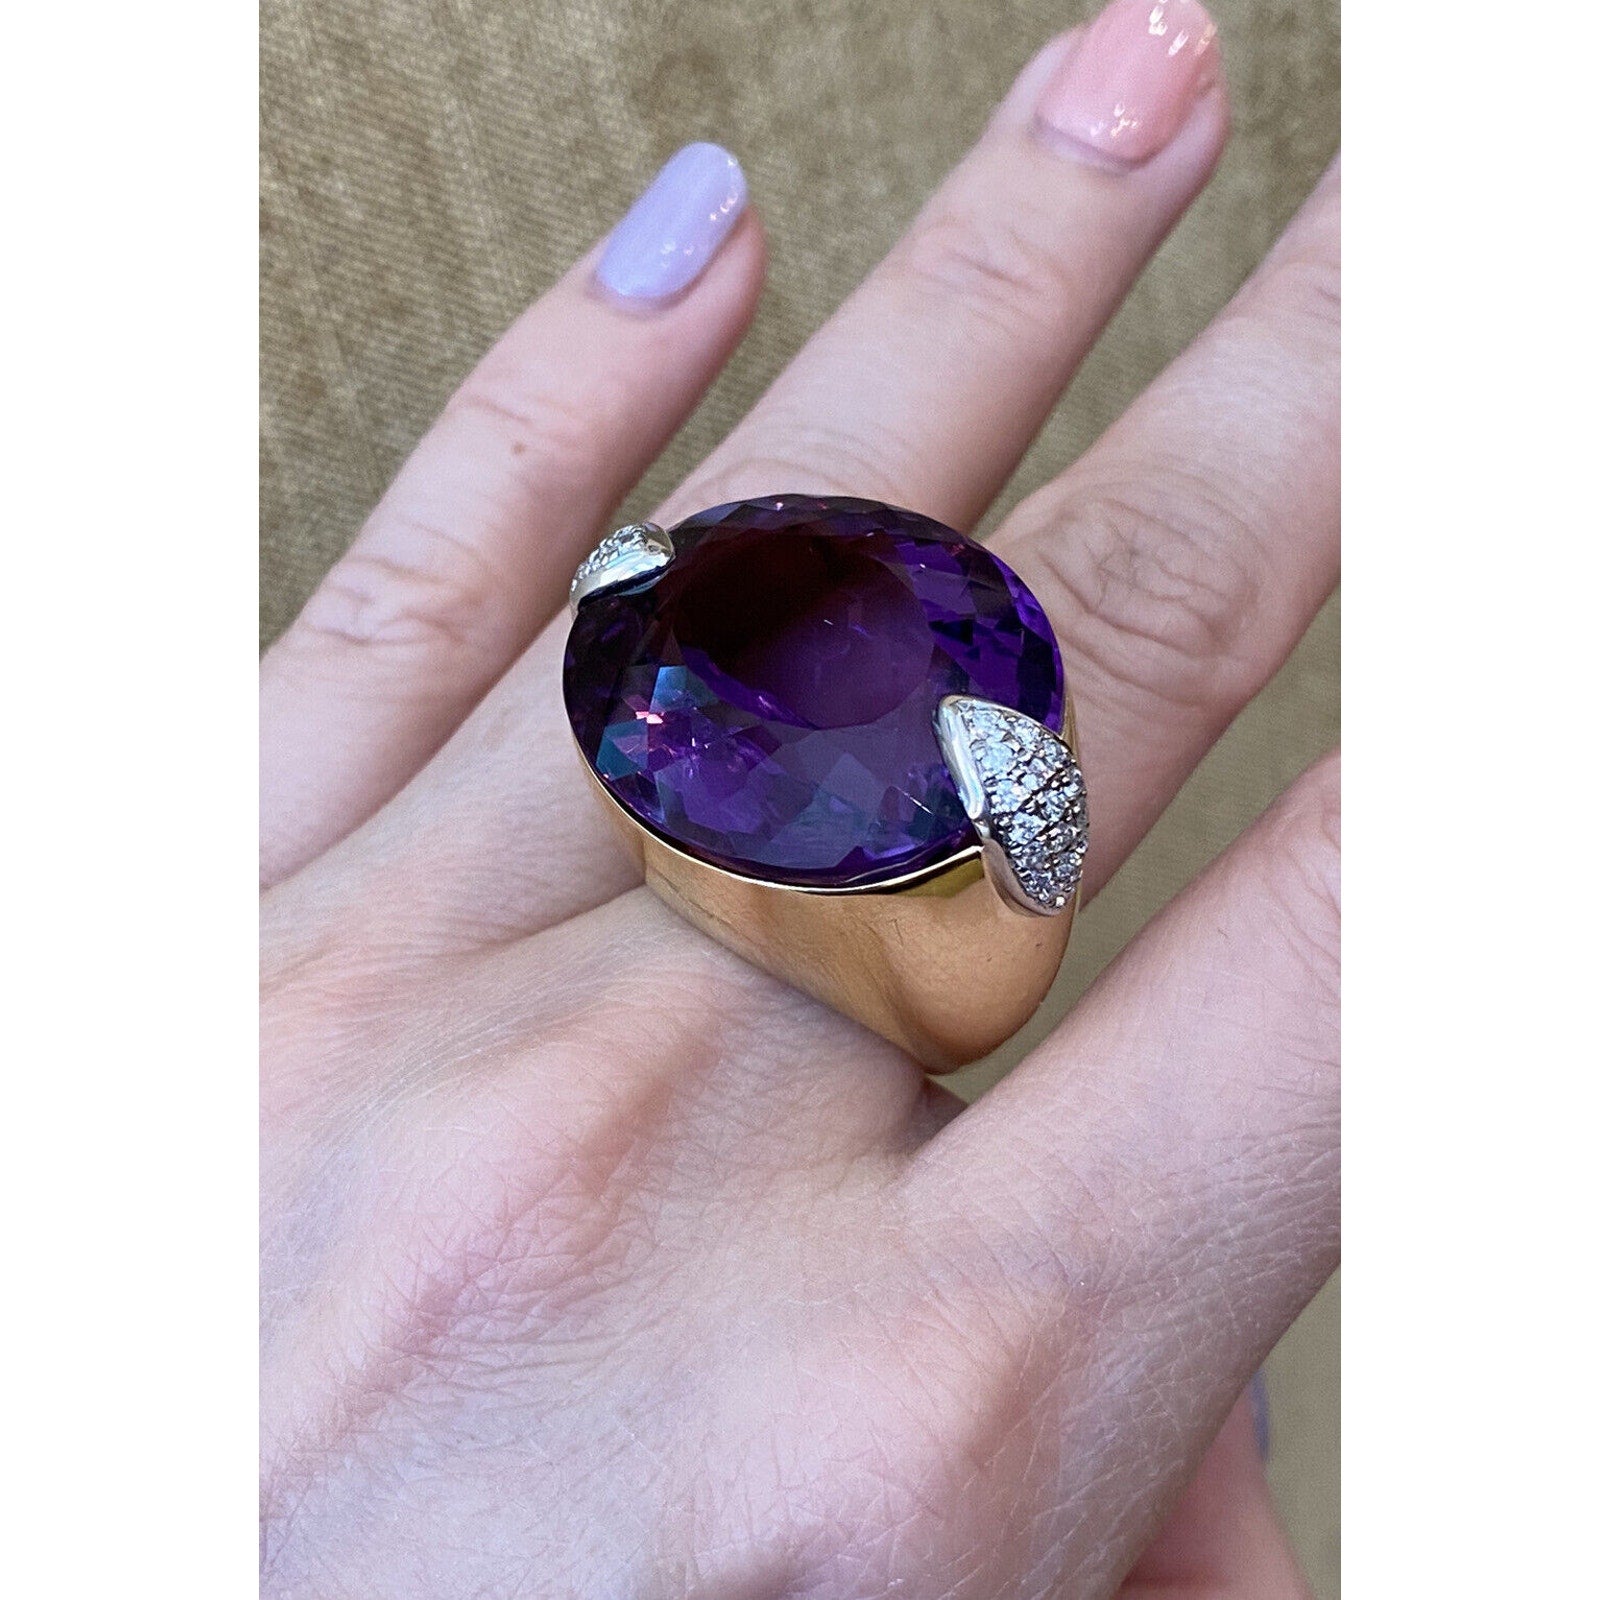 Large 54.03 cts Amethyst & Diamond Cocktail Ring in Plat & 18k Gold